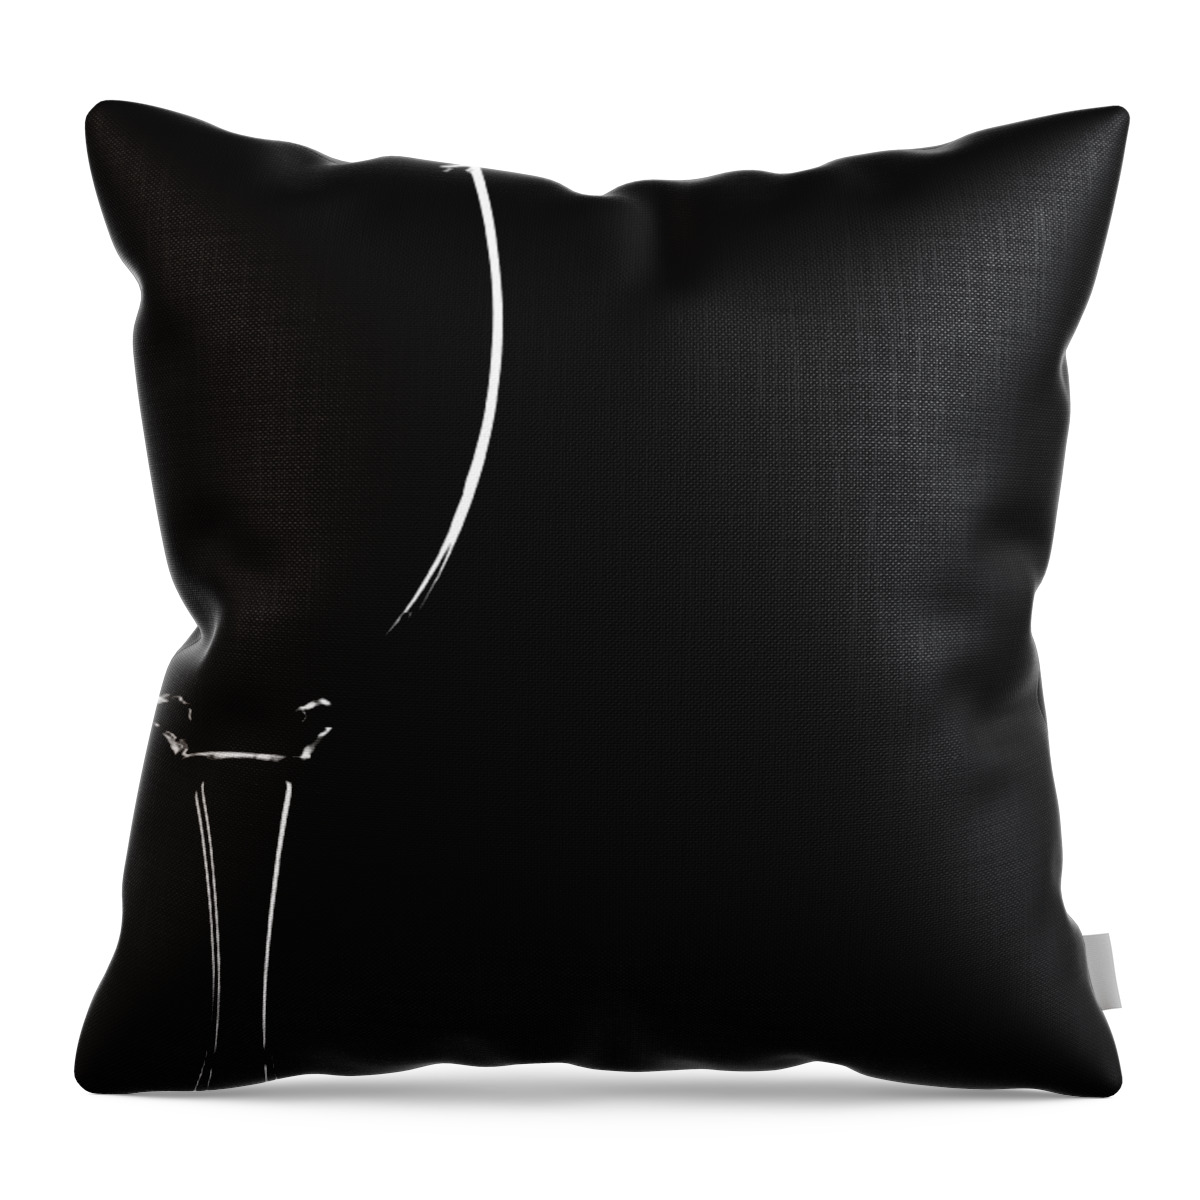 Alcohol Throw Pillow featuring the photograph Empty Space by Gert Lavsen